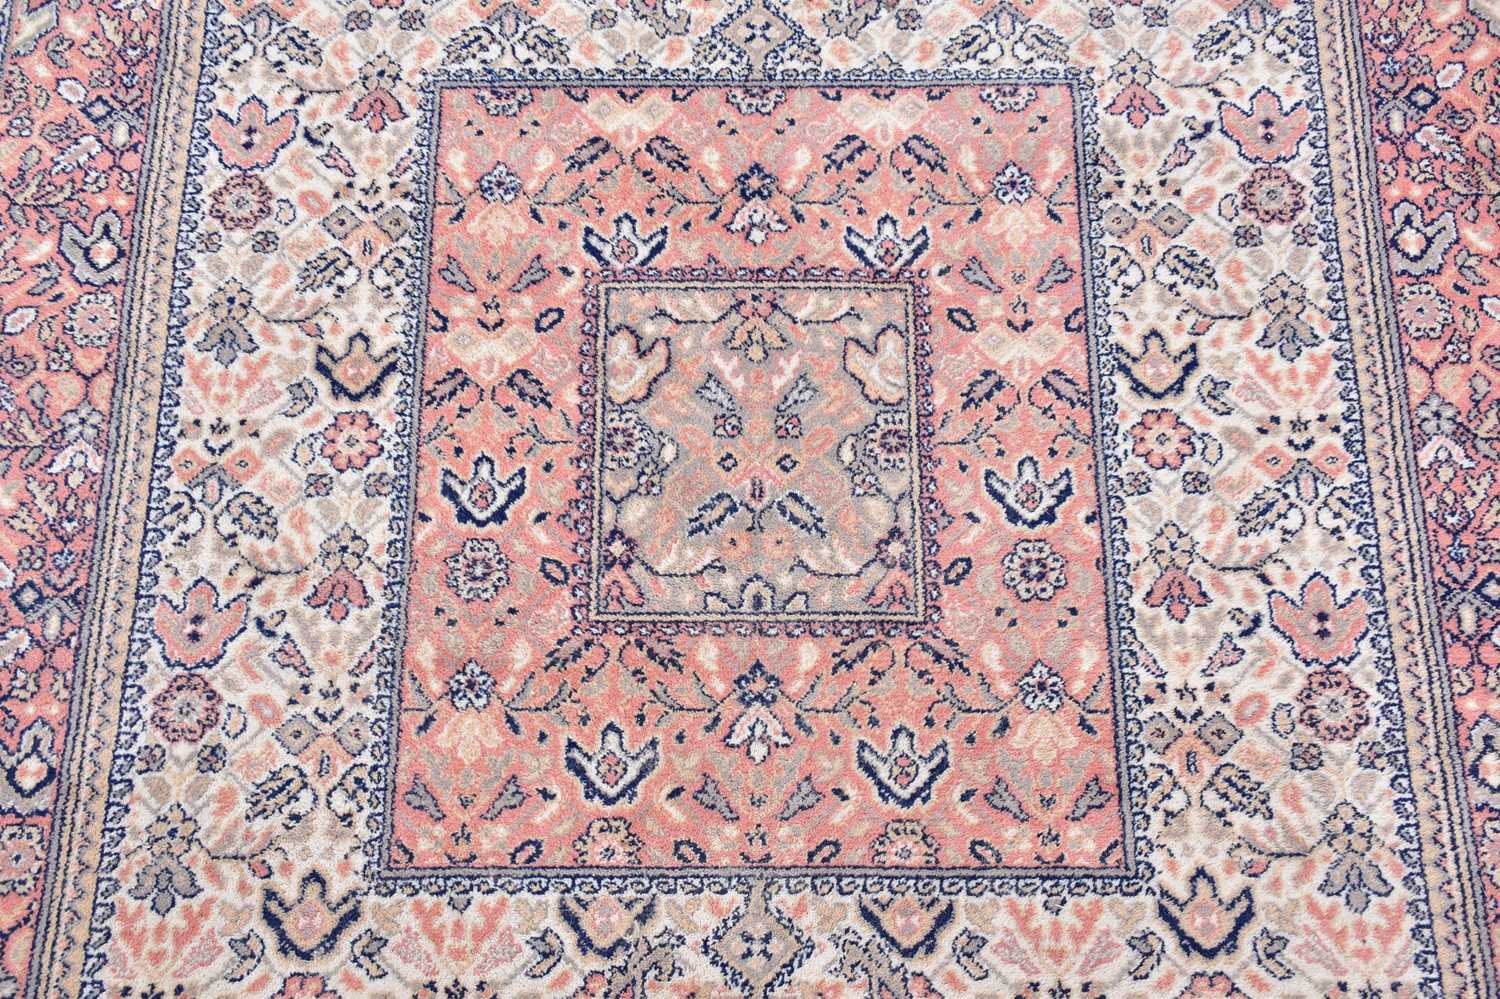 A Super Keshan rug with floral decoration on a salmon pink ground, 240 x 170cm. - Image 2 of 3